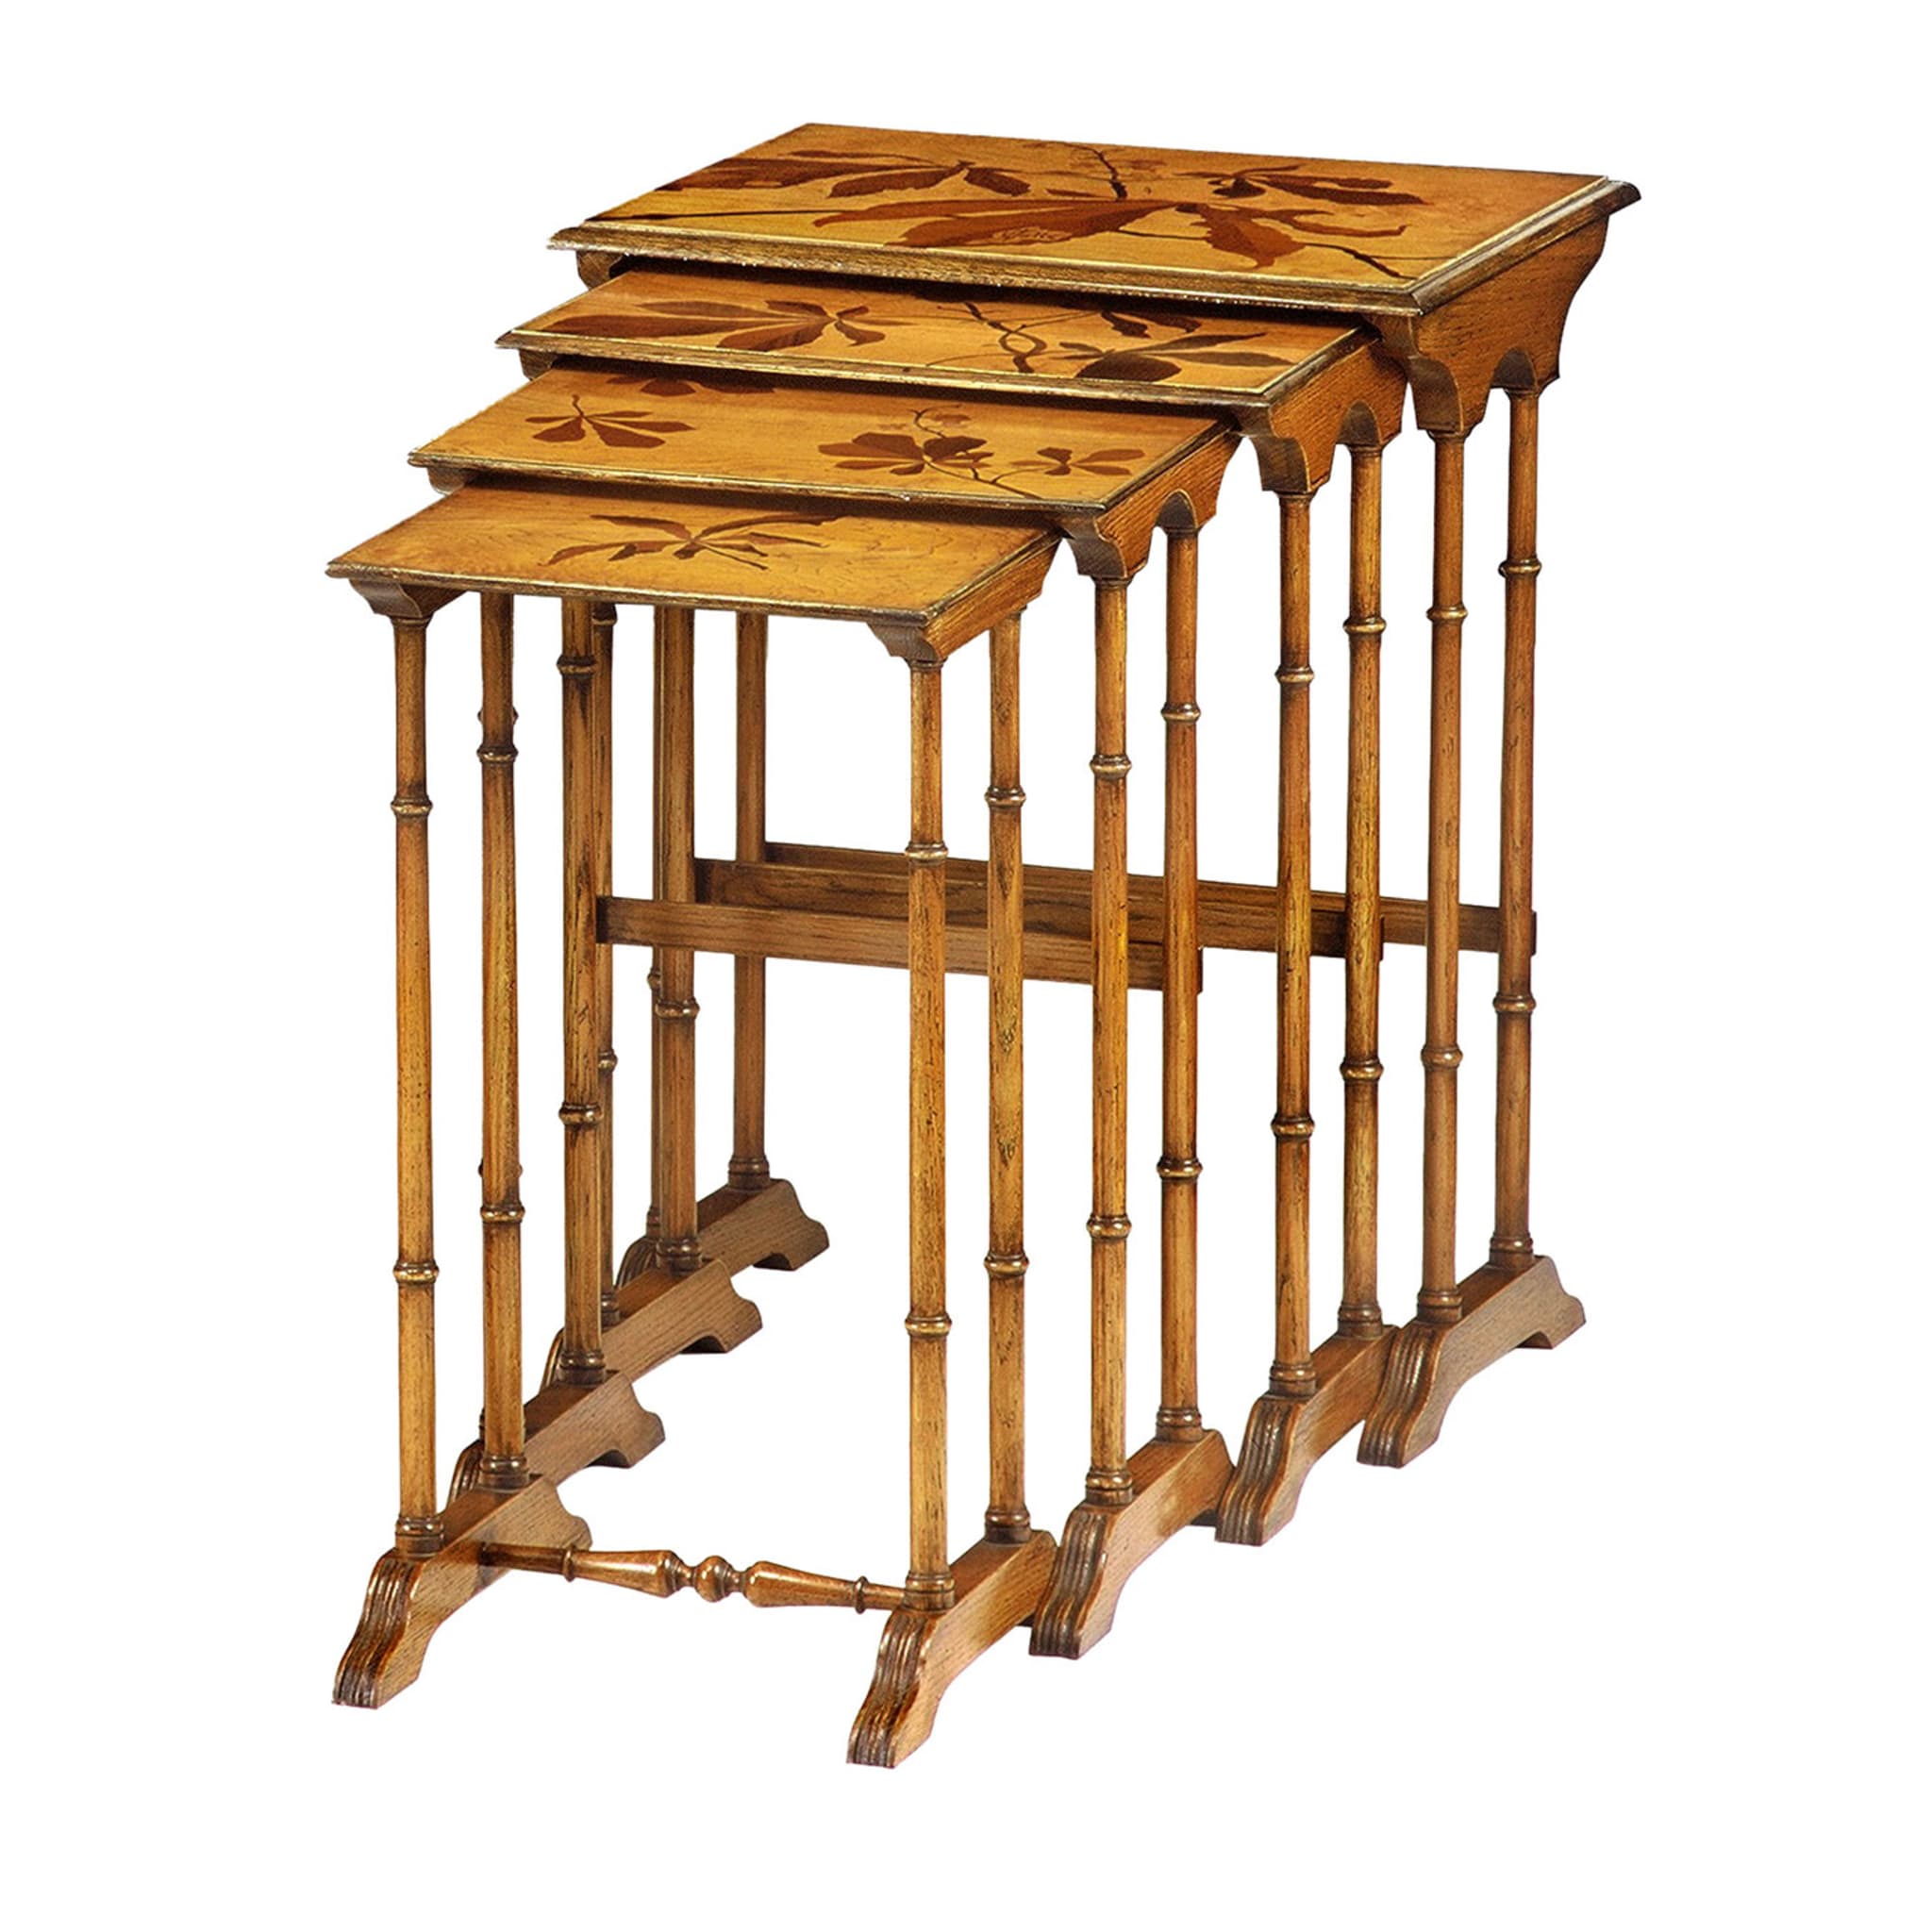 Set of 4 Inlaid Nesting Tables by Emile Gallè - Main view